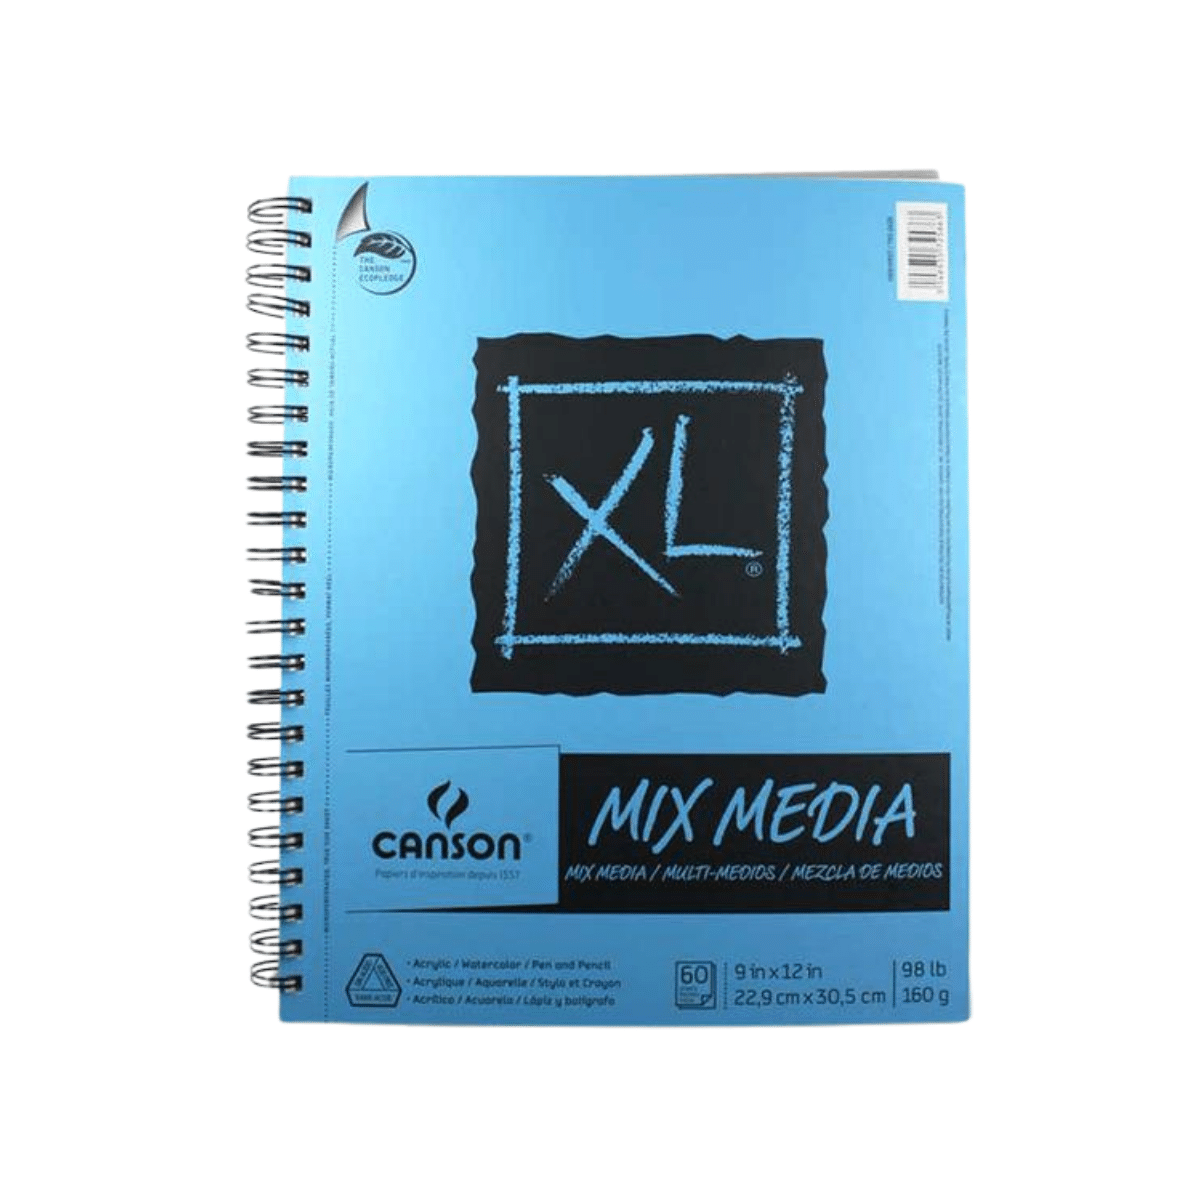 CANSON SKETCH PAD 9X12 24 SHEETS SPIRAL 90GSM